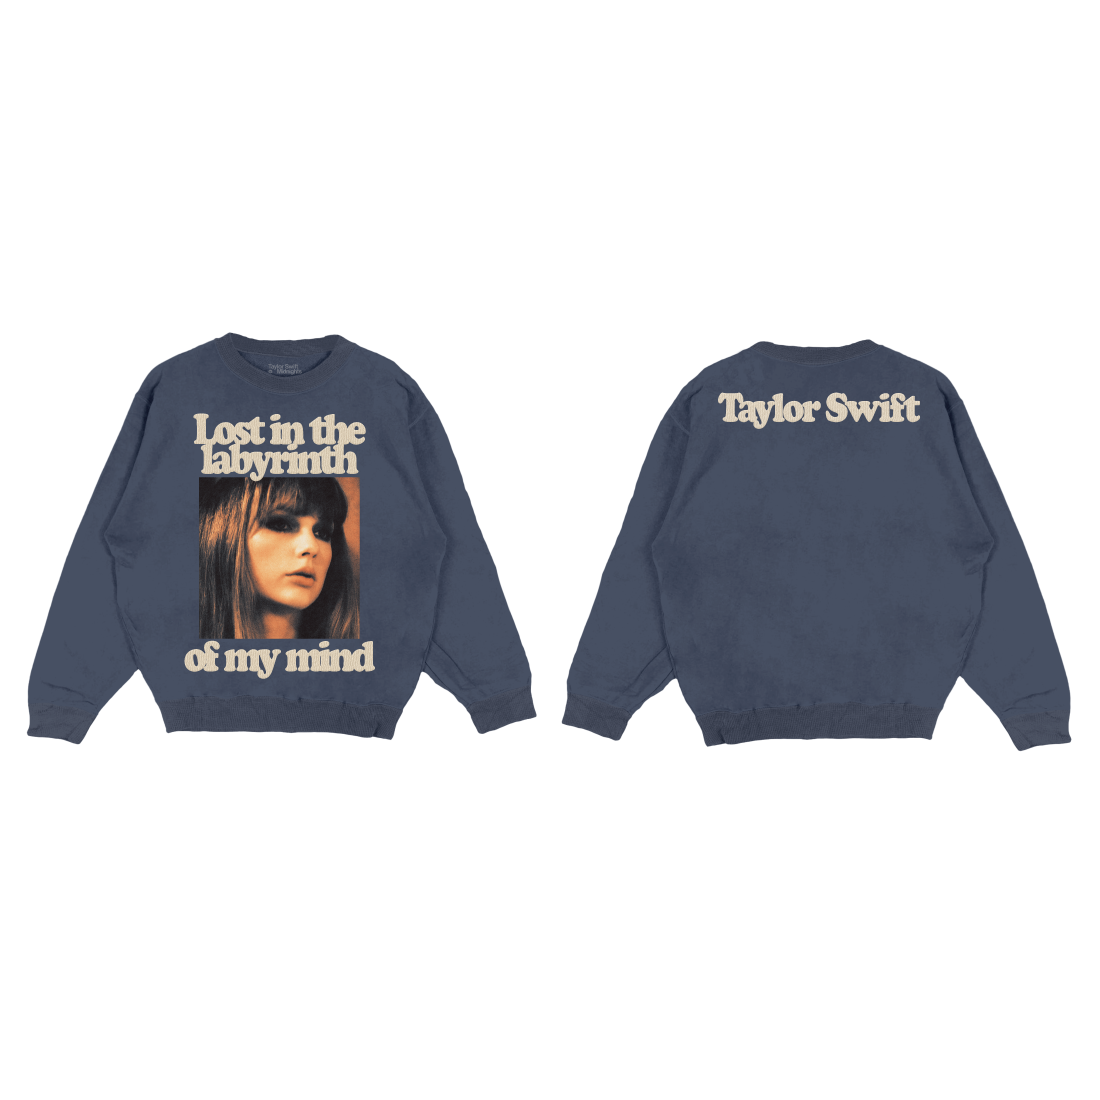 https://images.bravado.de/prod/product-assets/product-asset-data/taylor-swift/taylor-swift/products/505831/web/416920/image-thumb__416920__3000x3000_original/Taylor-Swift-Lost-in-the-Labyrinth-of-my-Mind-Longsleeves-blau-505831-416920.png